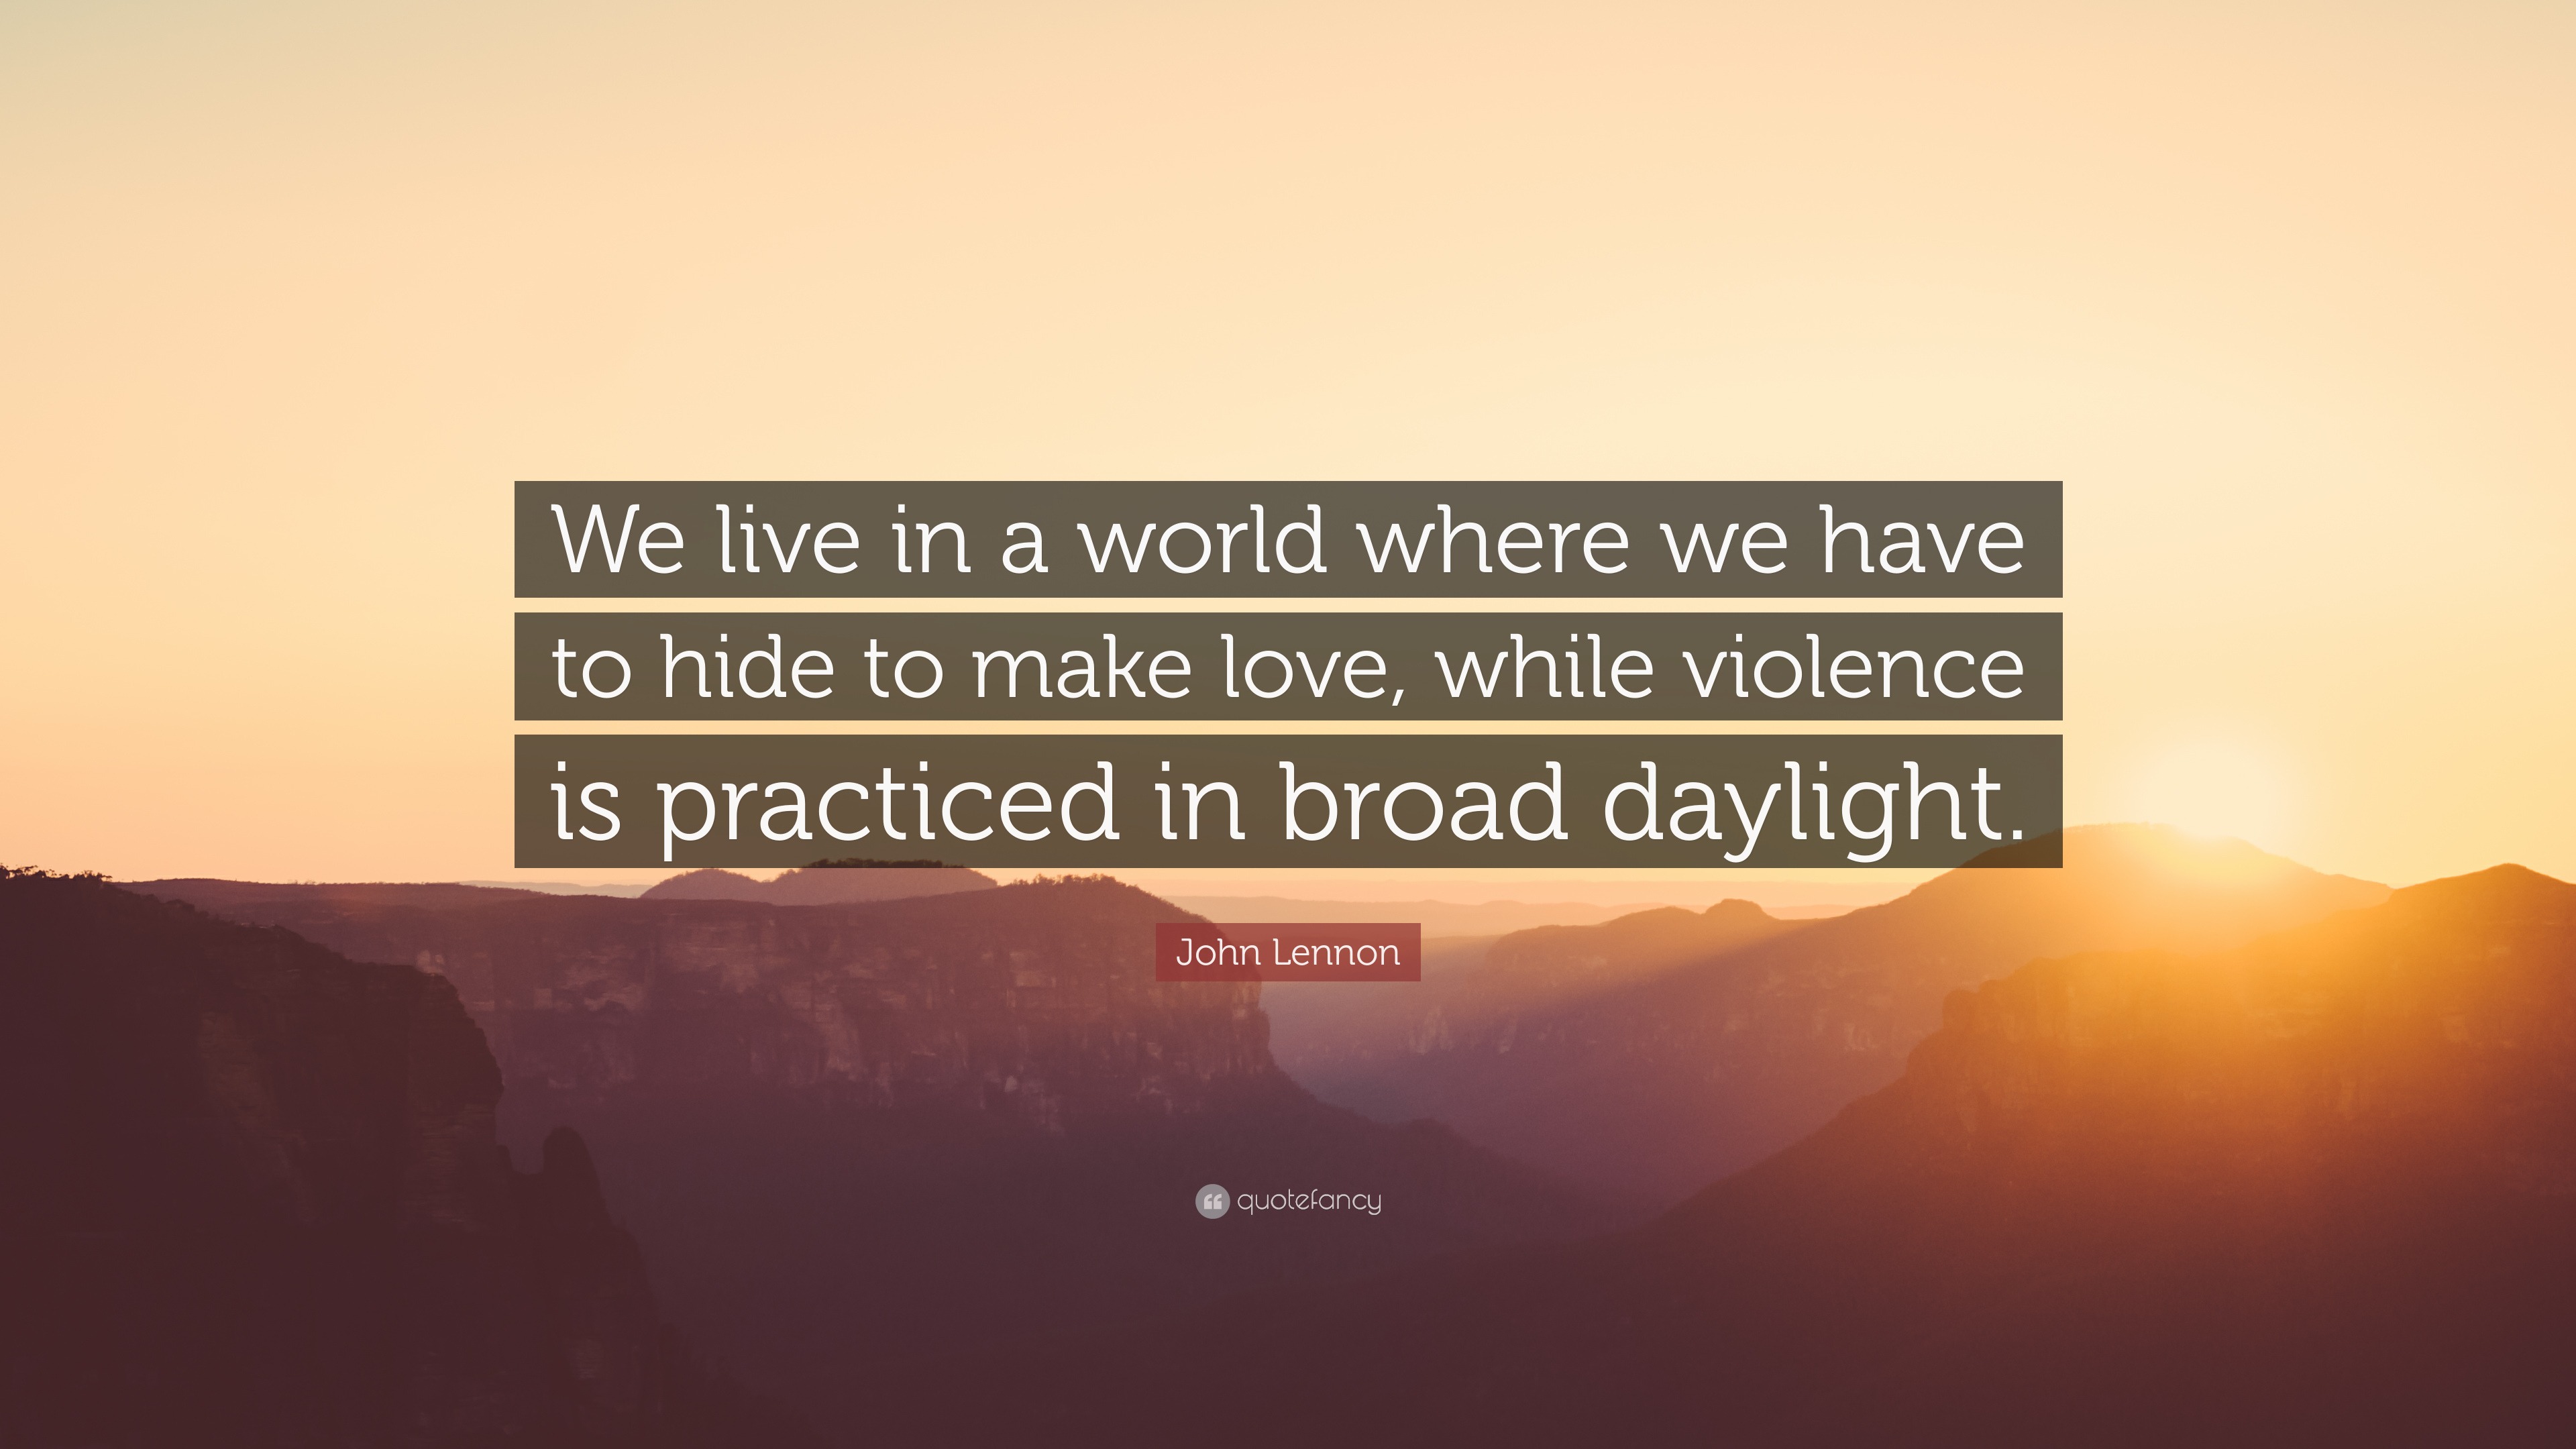 John Lennon Quote We live in a world where we have to hide to make